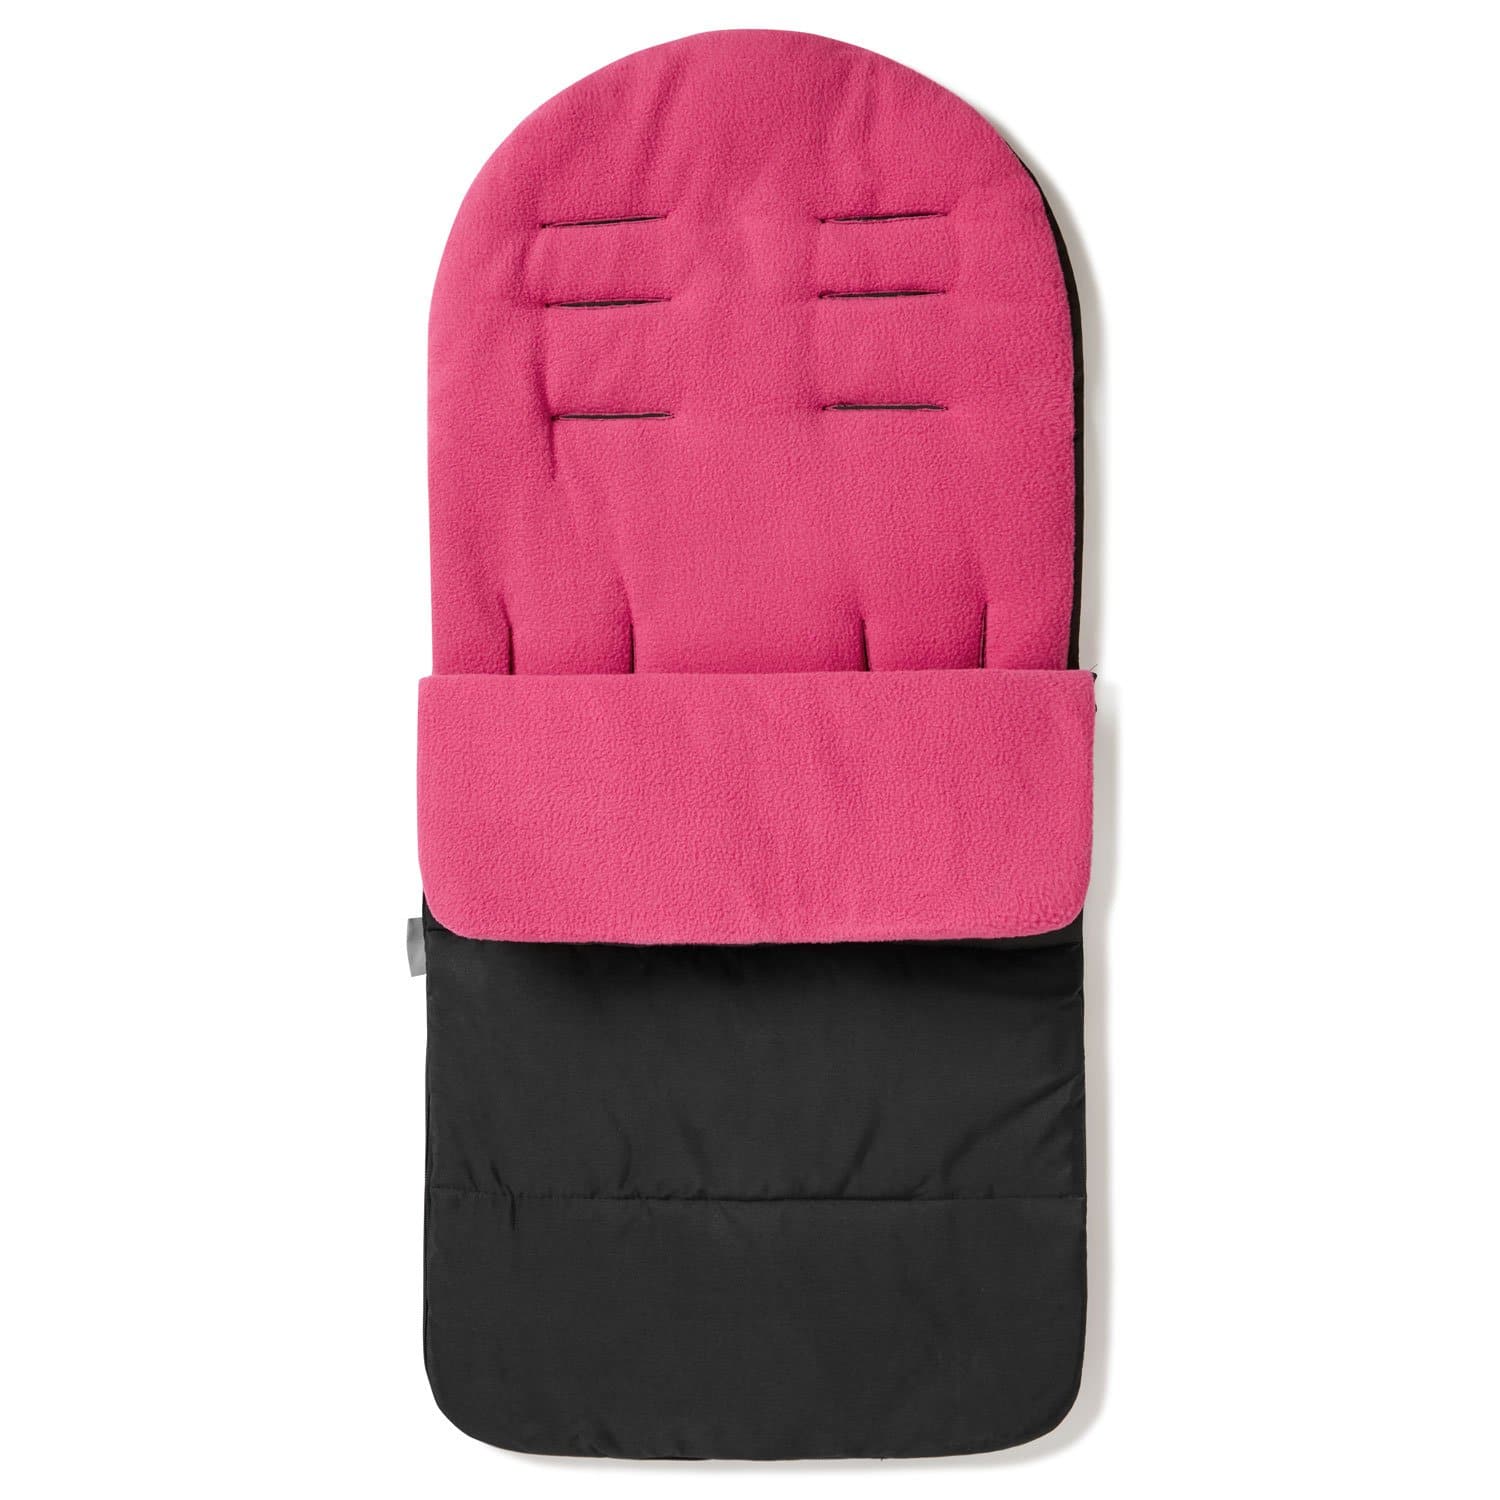 Premium Footmuff / Cosy Toes Compatible with Baby Jogger - Pink Rose / Fits All Models | For Your Little One